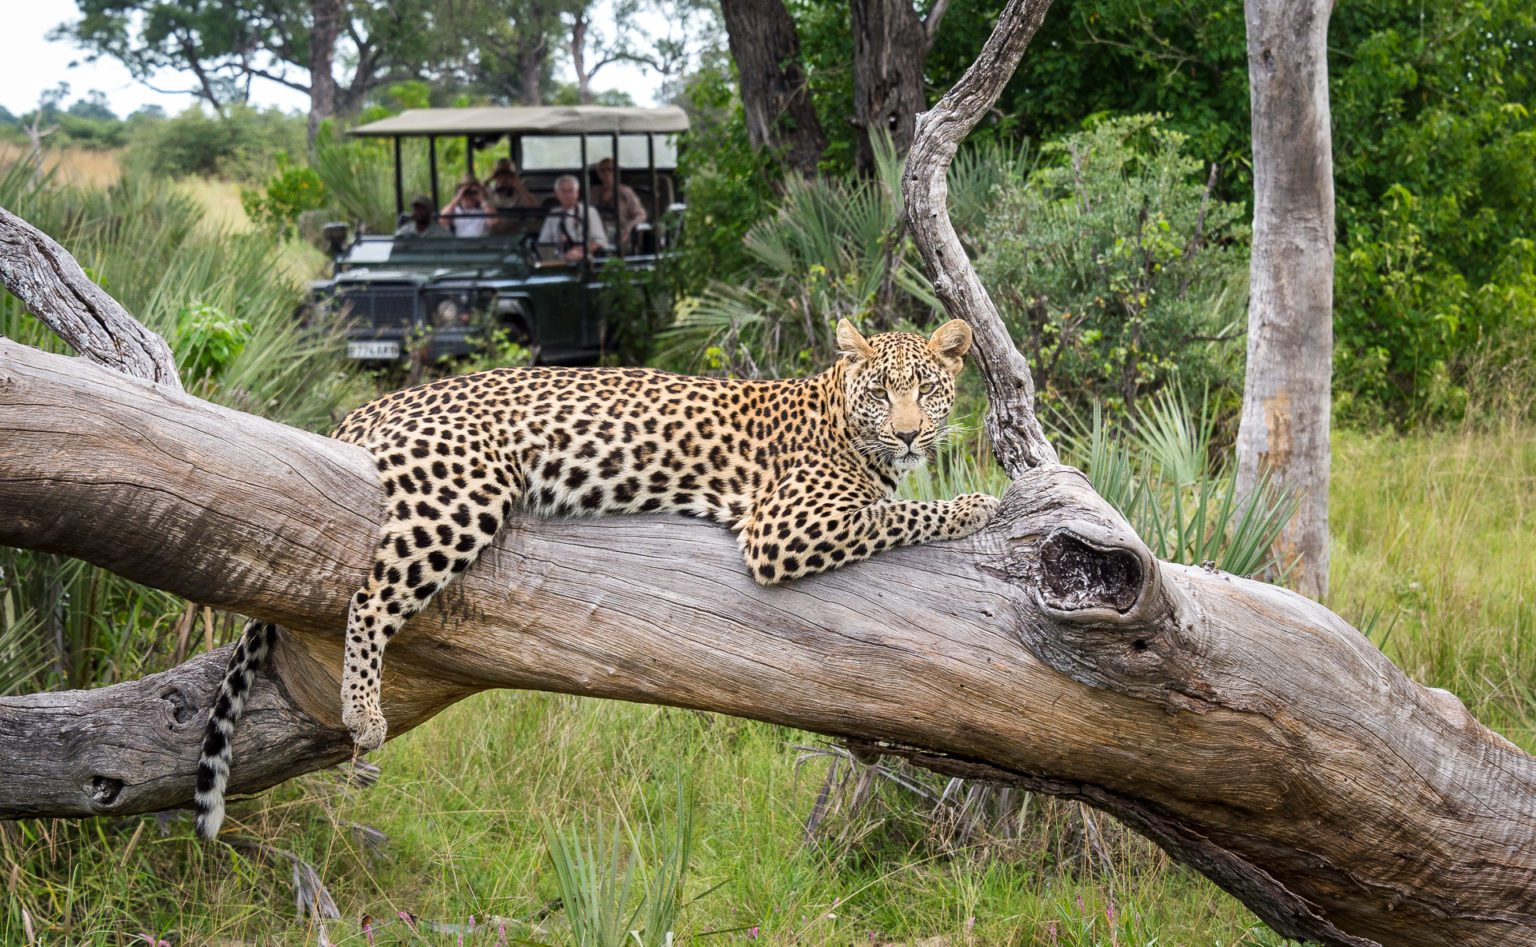 seba camp game drive with guests observing a leopard in a tree on the best botswana safari